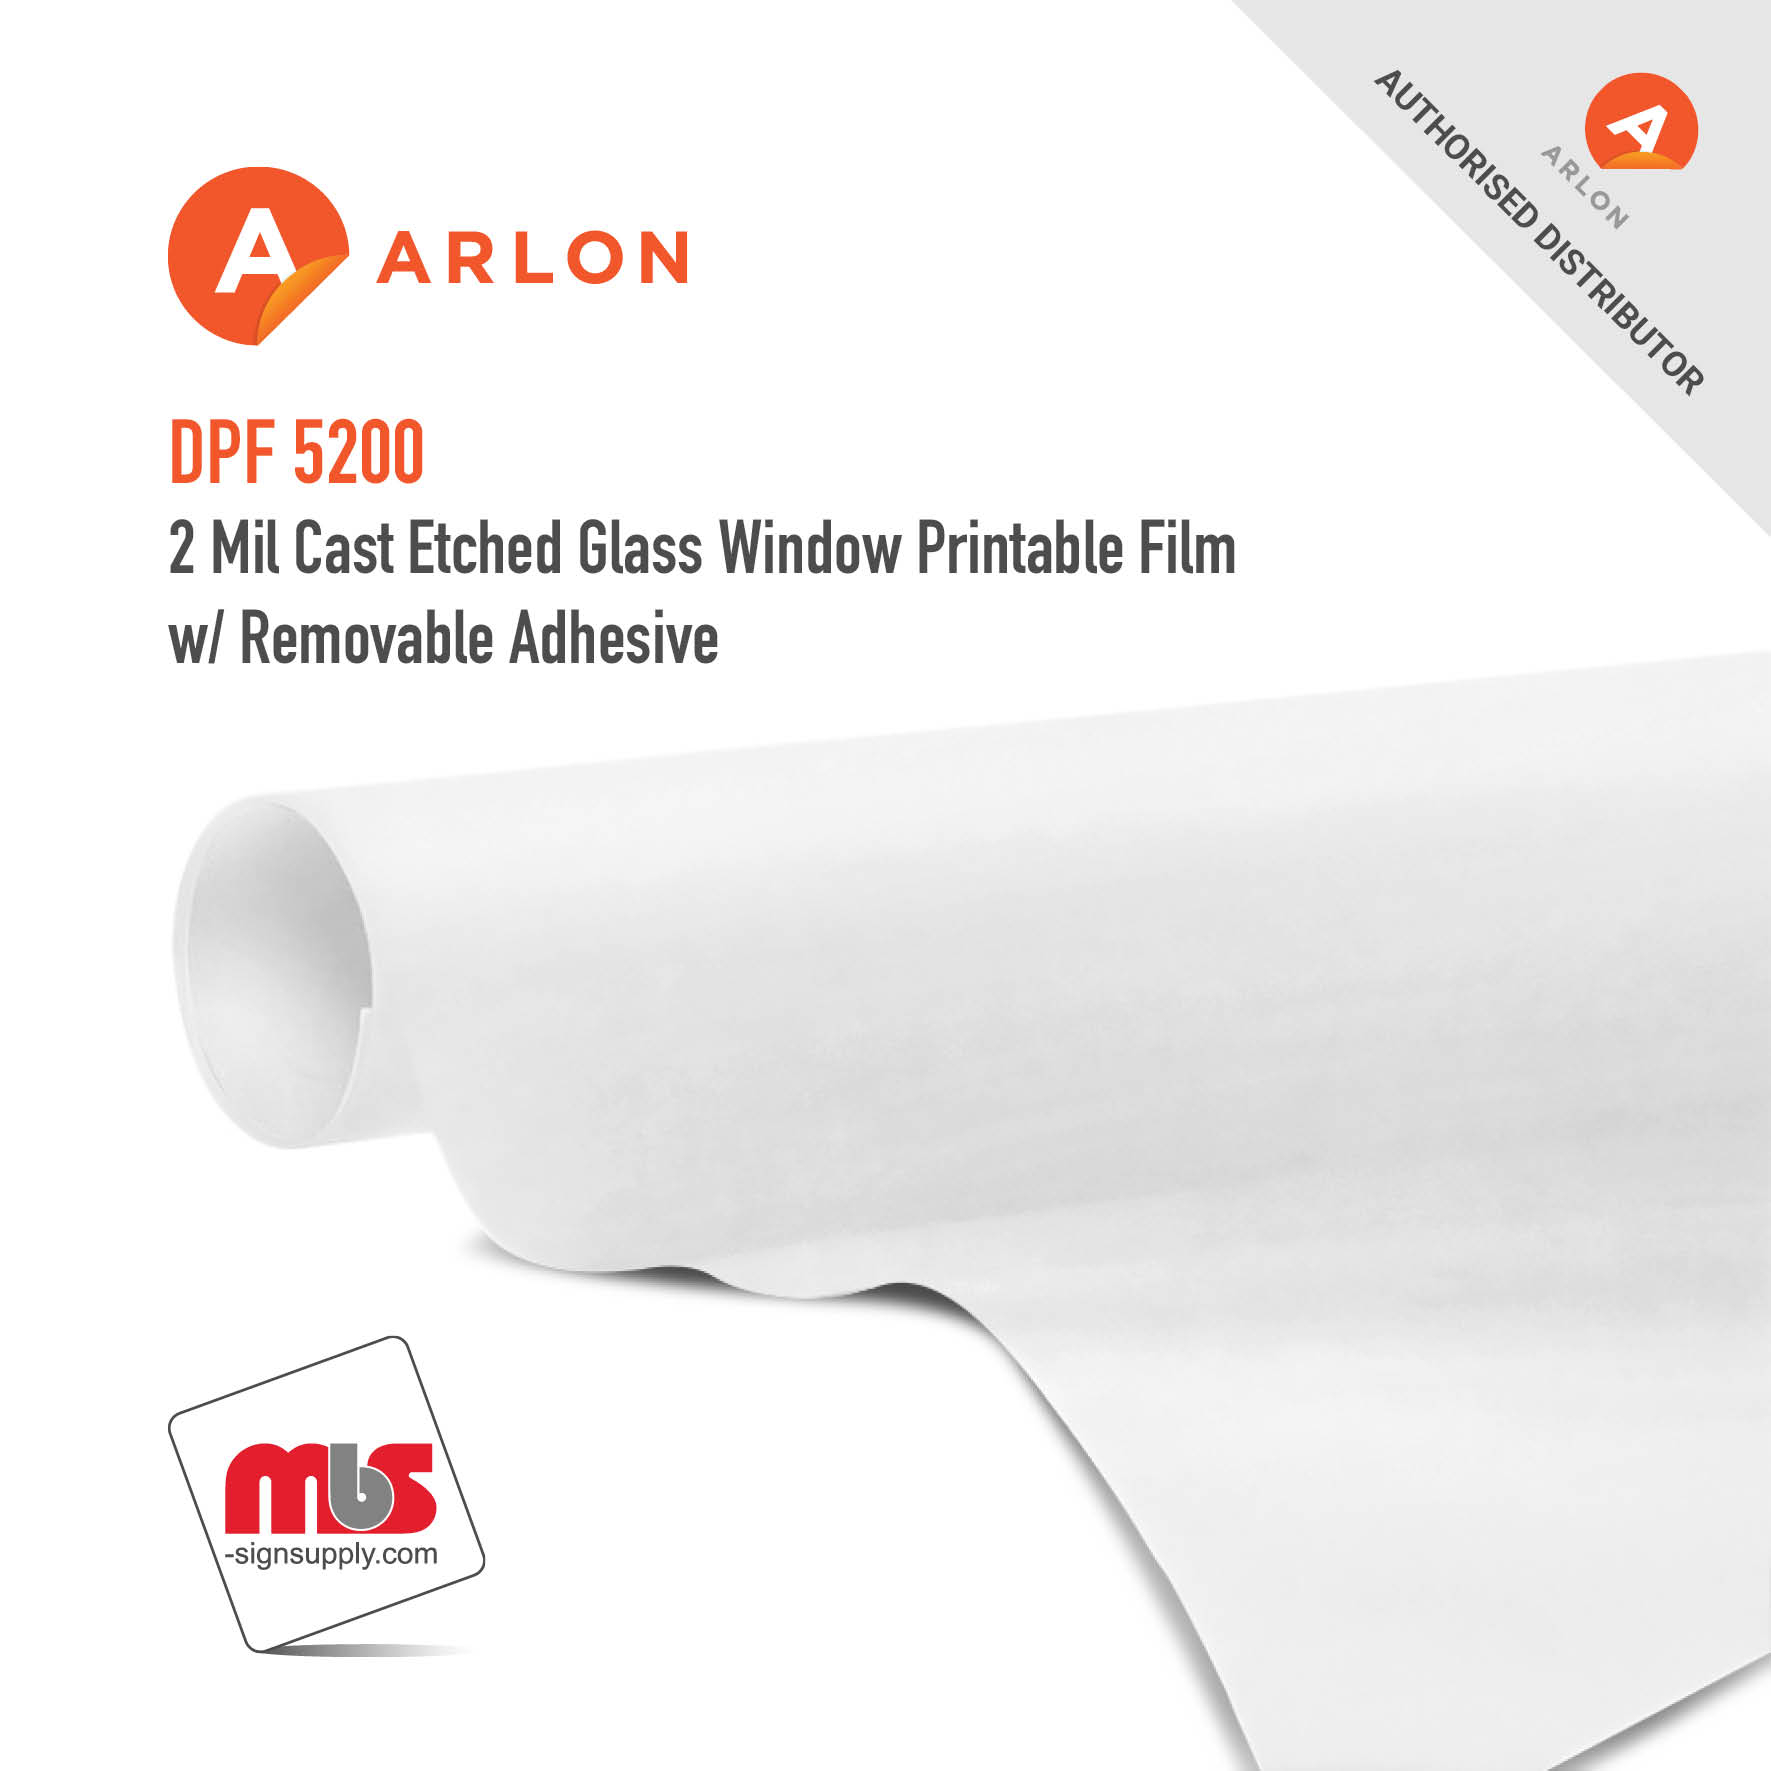 48'' x 10 Yard Roll - Arlon DPF 5200 2 Mil Cast Silver Etched Glass Window Printable Film w/ Removable Adhesive